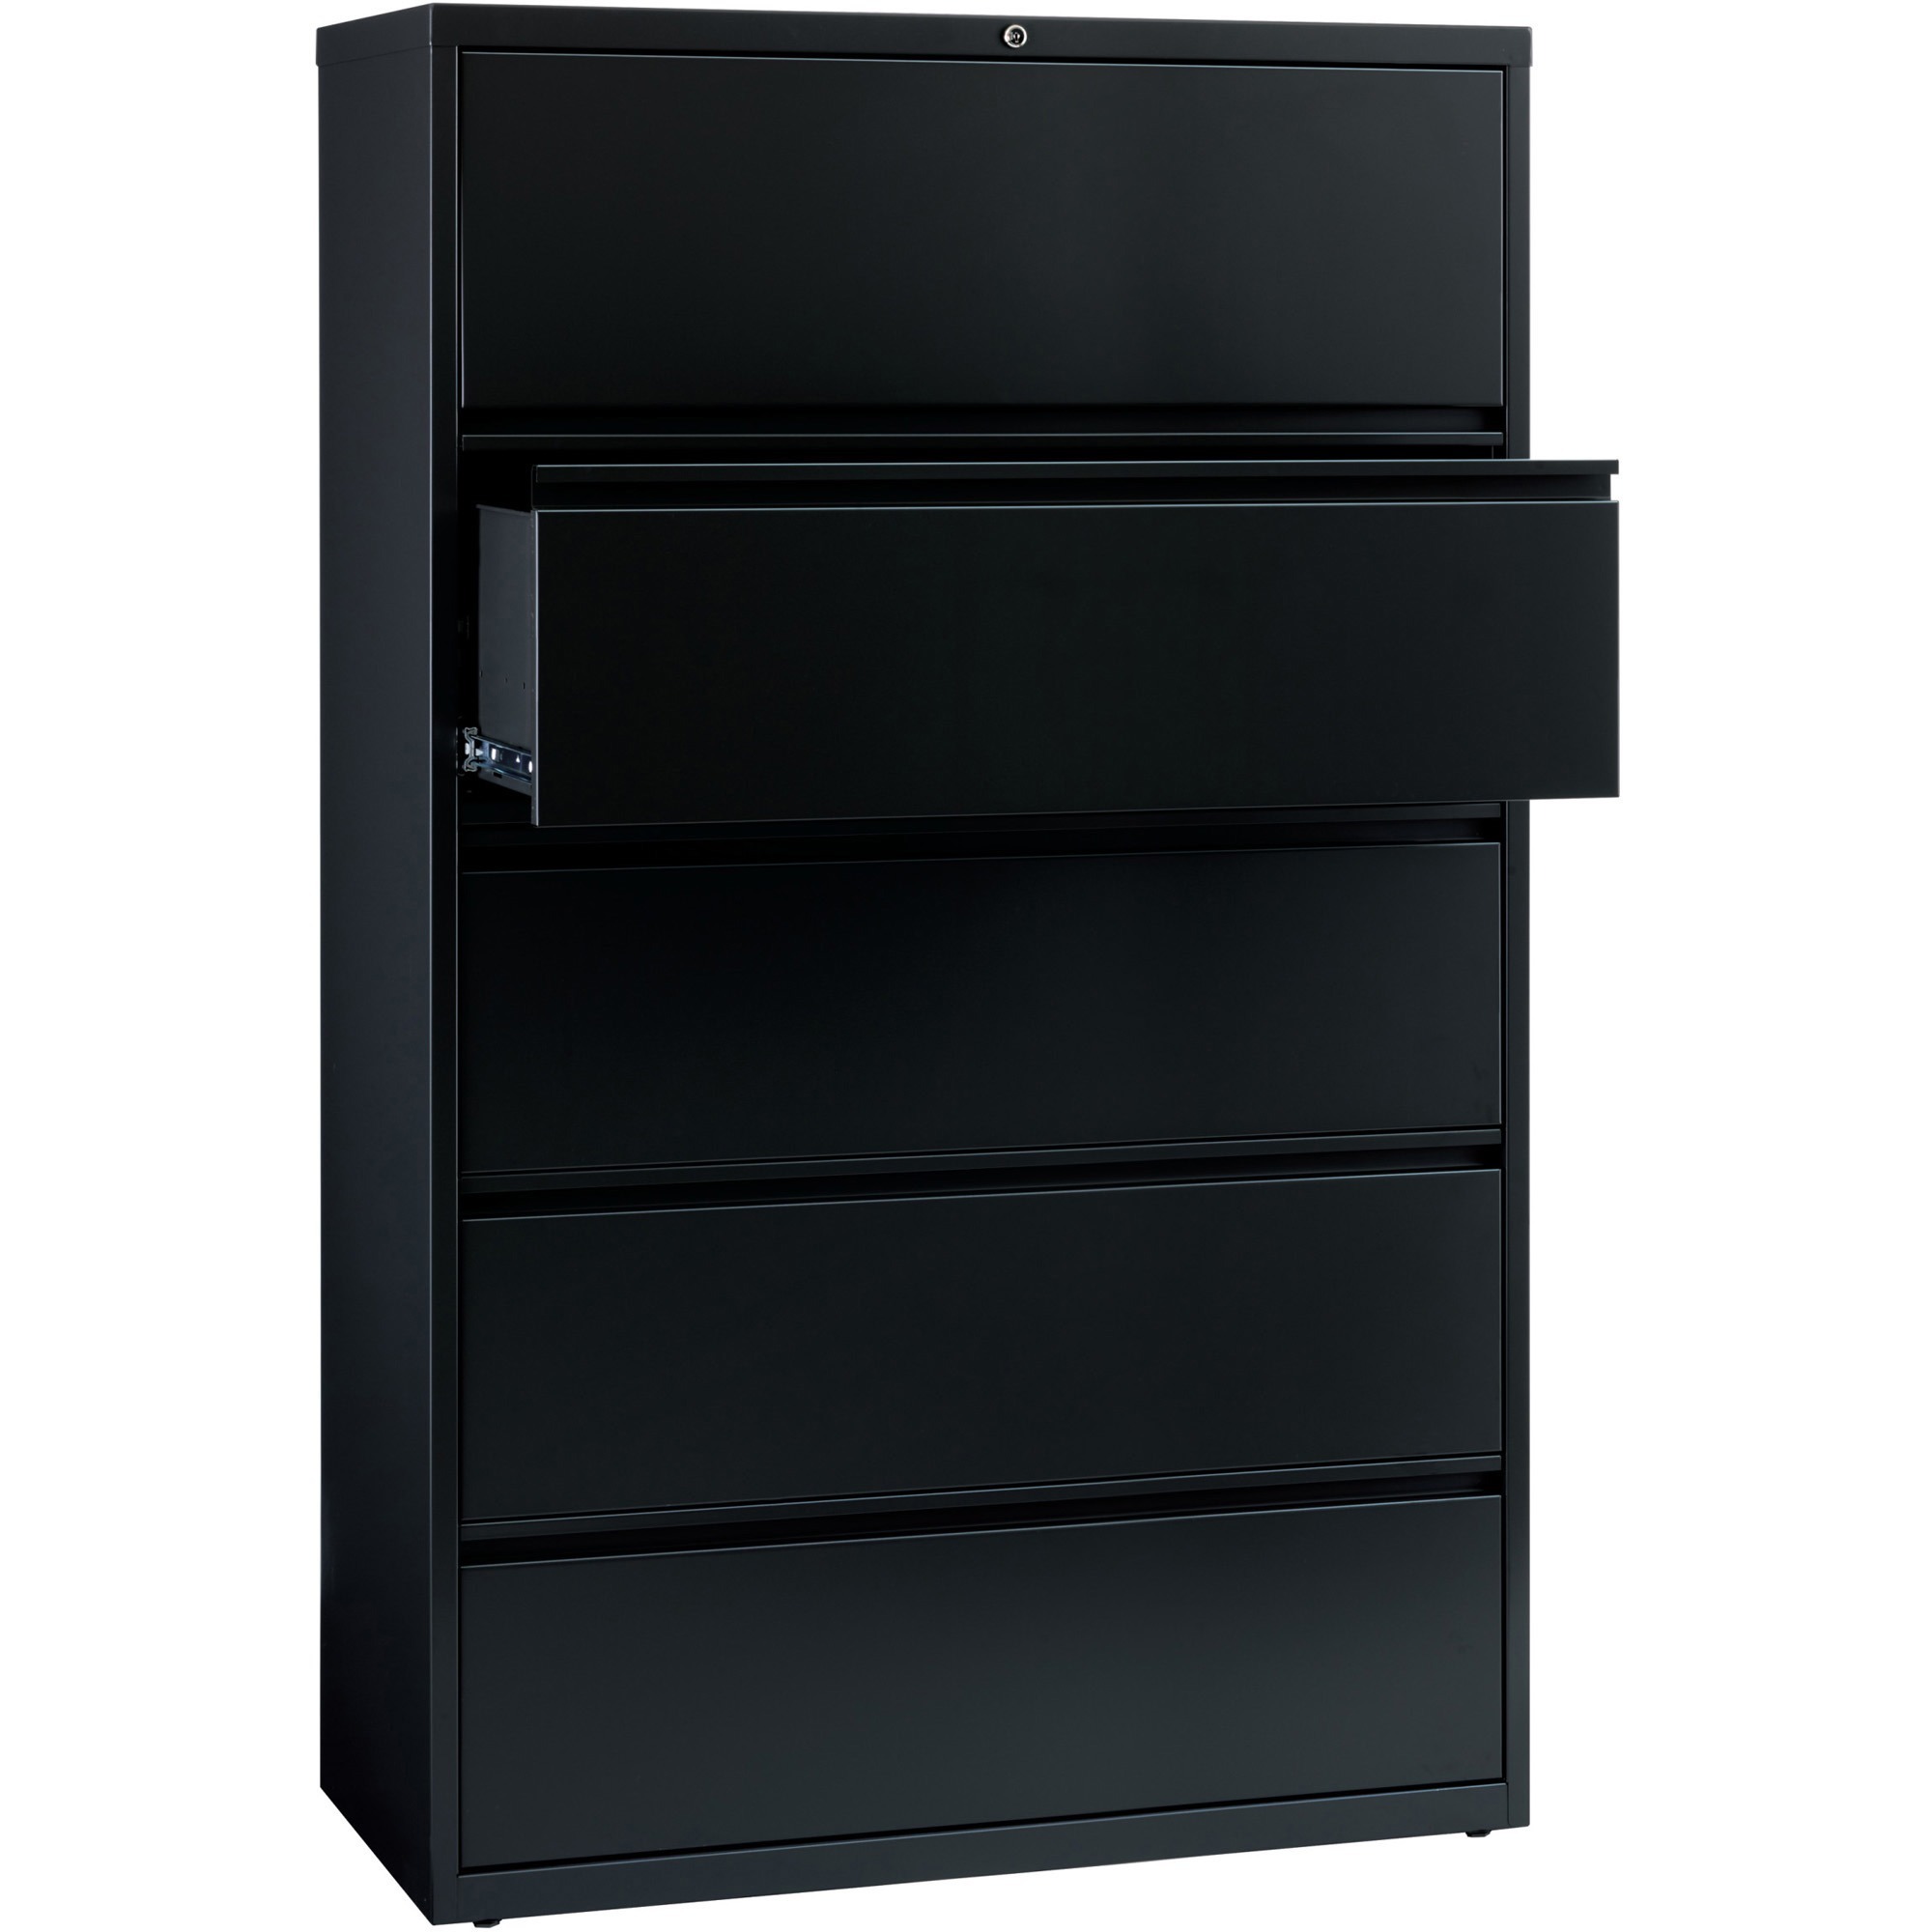 5-Drawer Letter Deluxe File Cabinet with Lock SGN-526L, Metal File Cabinets